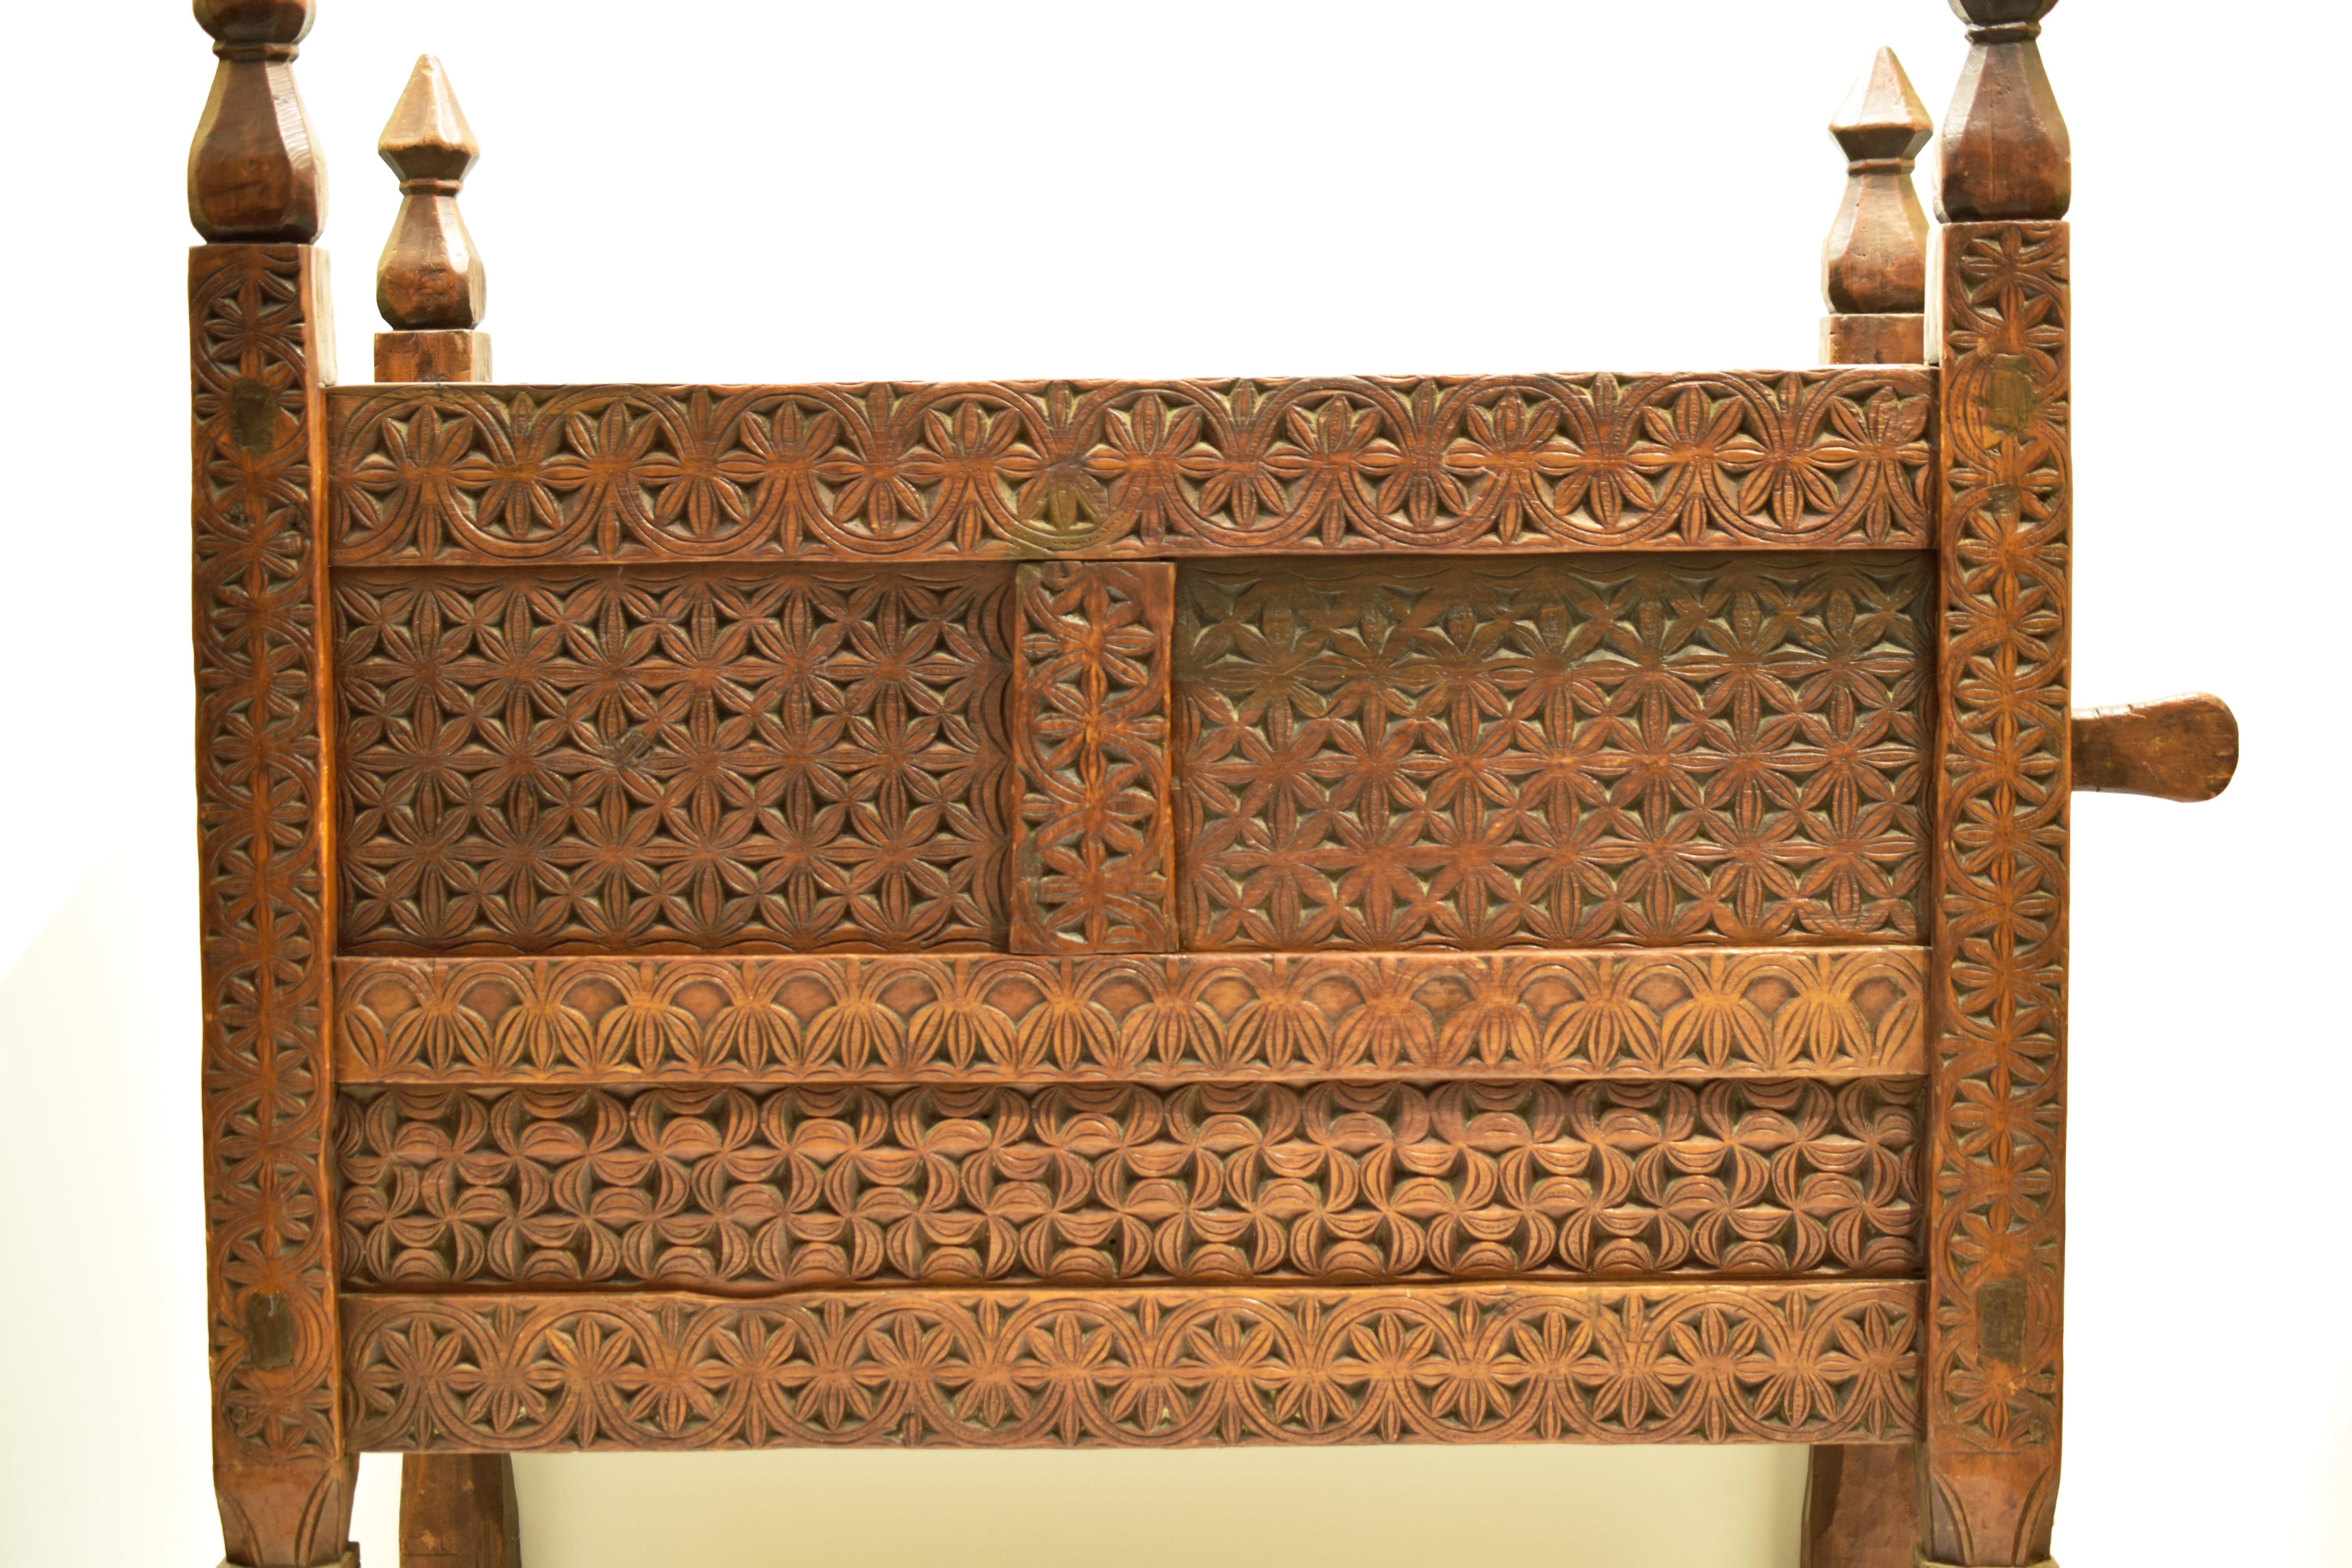 Swat, Pakistan
Period: mid-19th century
Entirely hand carved
Interlocking structure no gluing
Very good condition
Measurements: cm W113 x D59 x H121.5 cm.